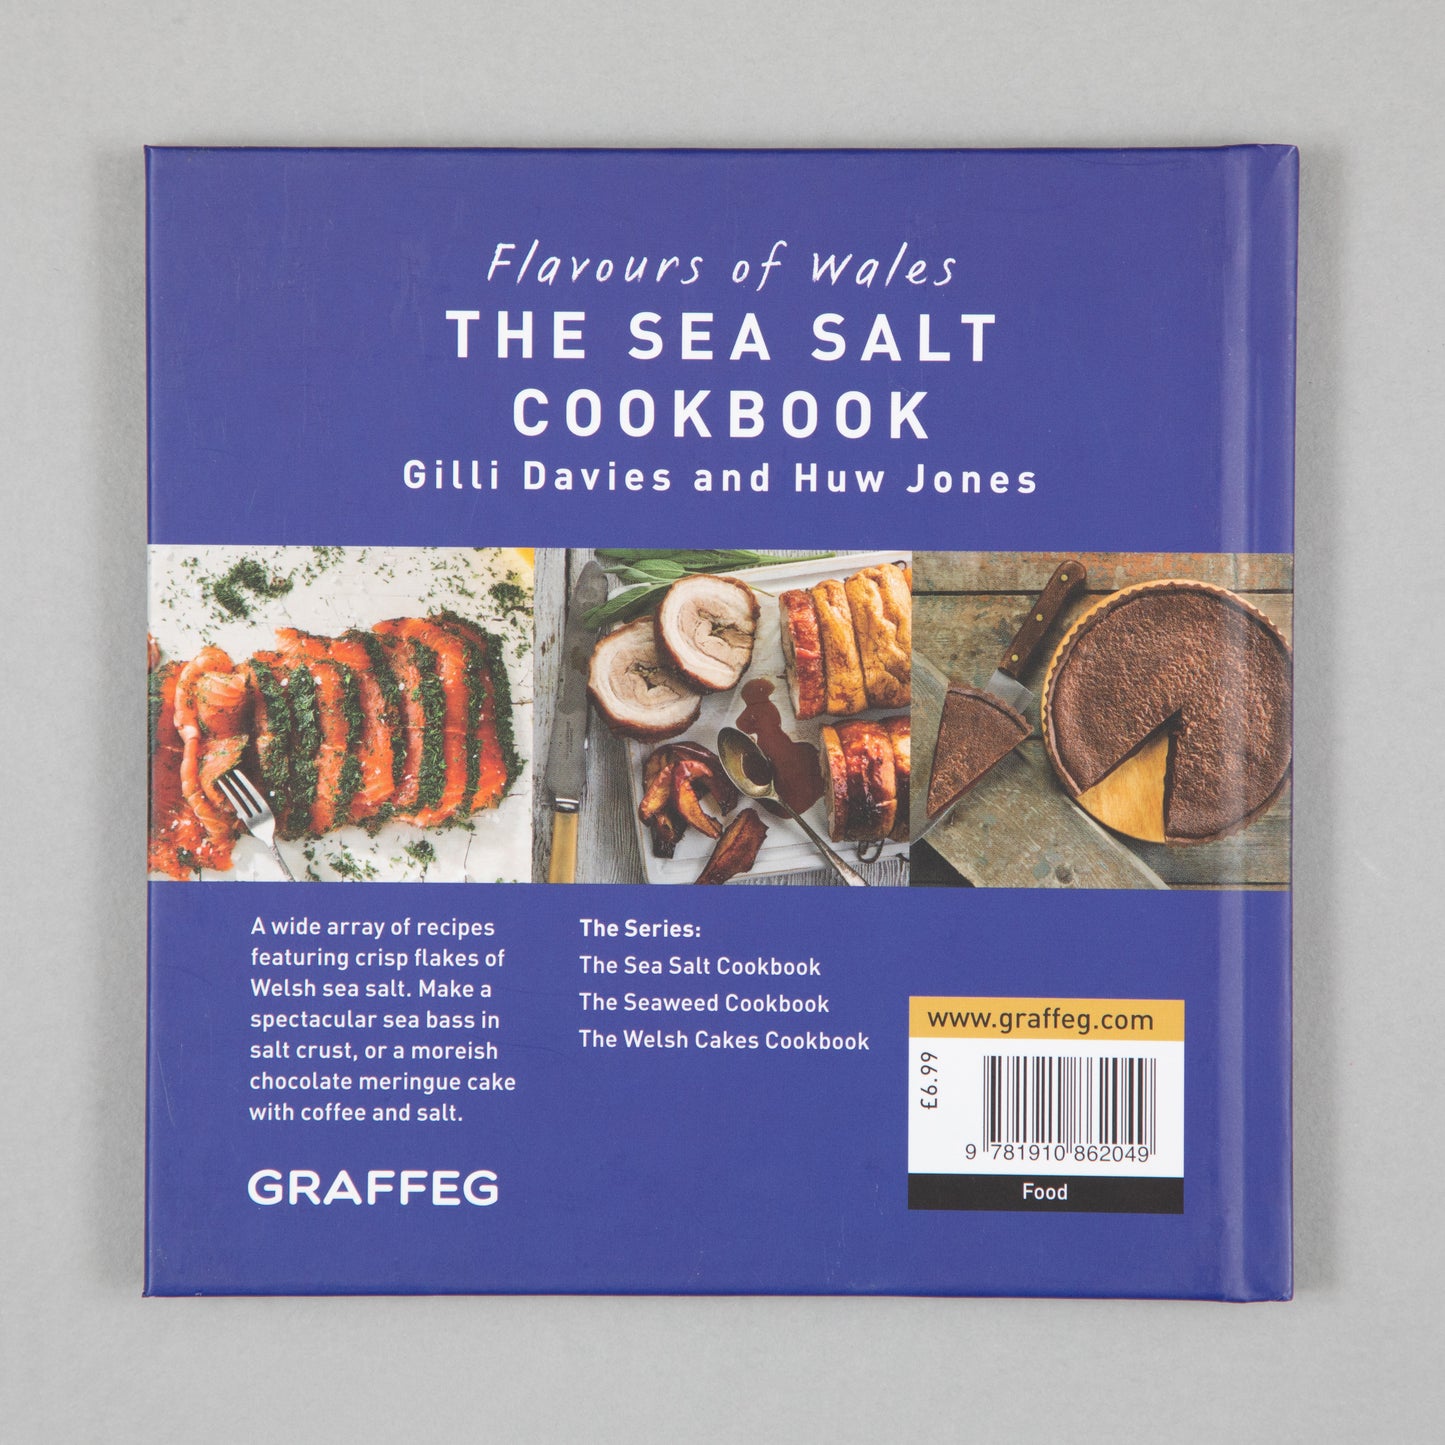 Flavours of Wales: The Sea Salt Cookbook